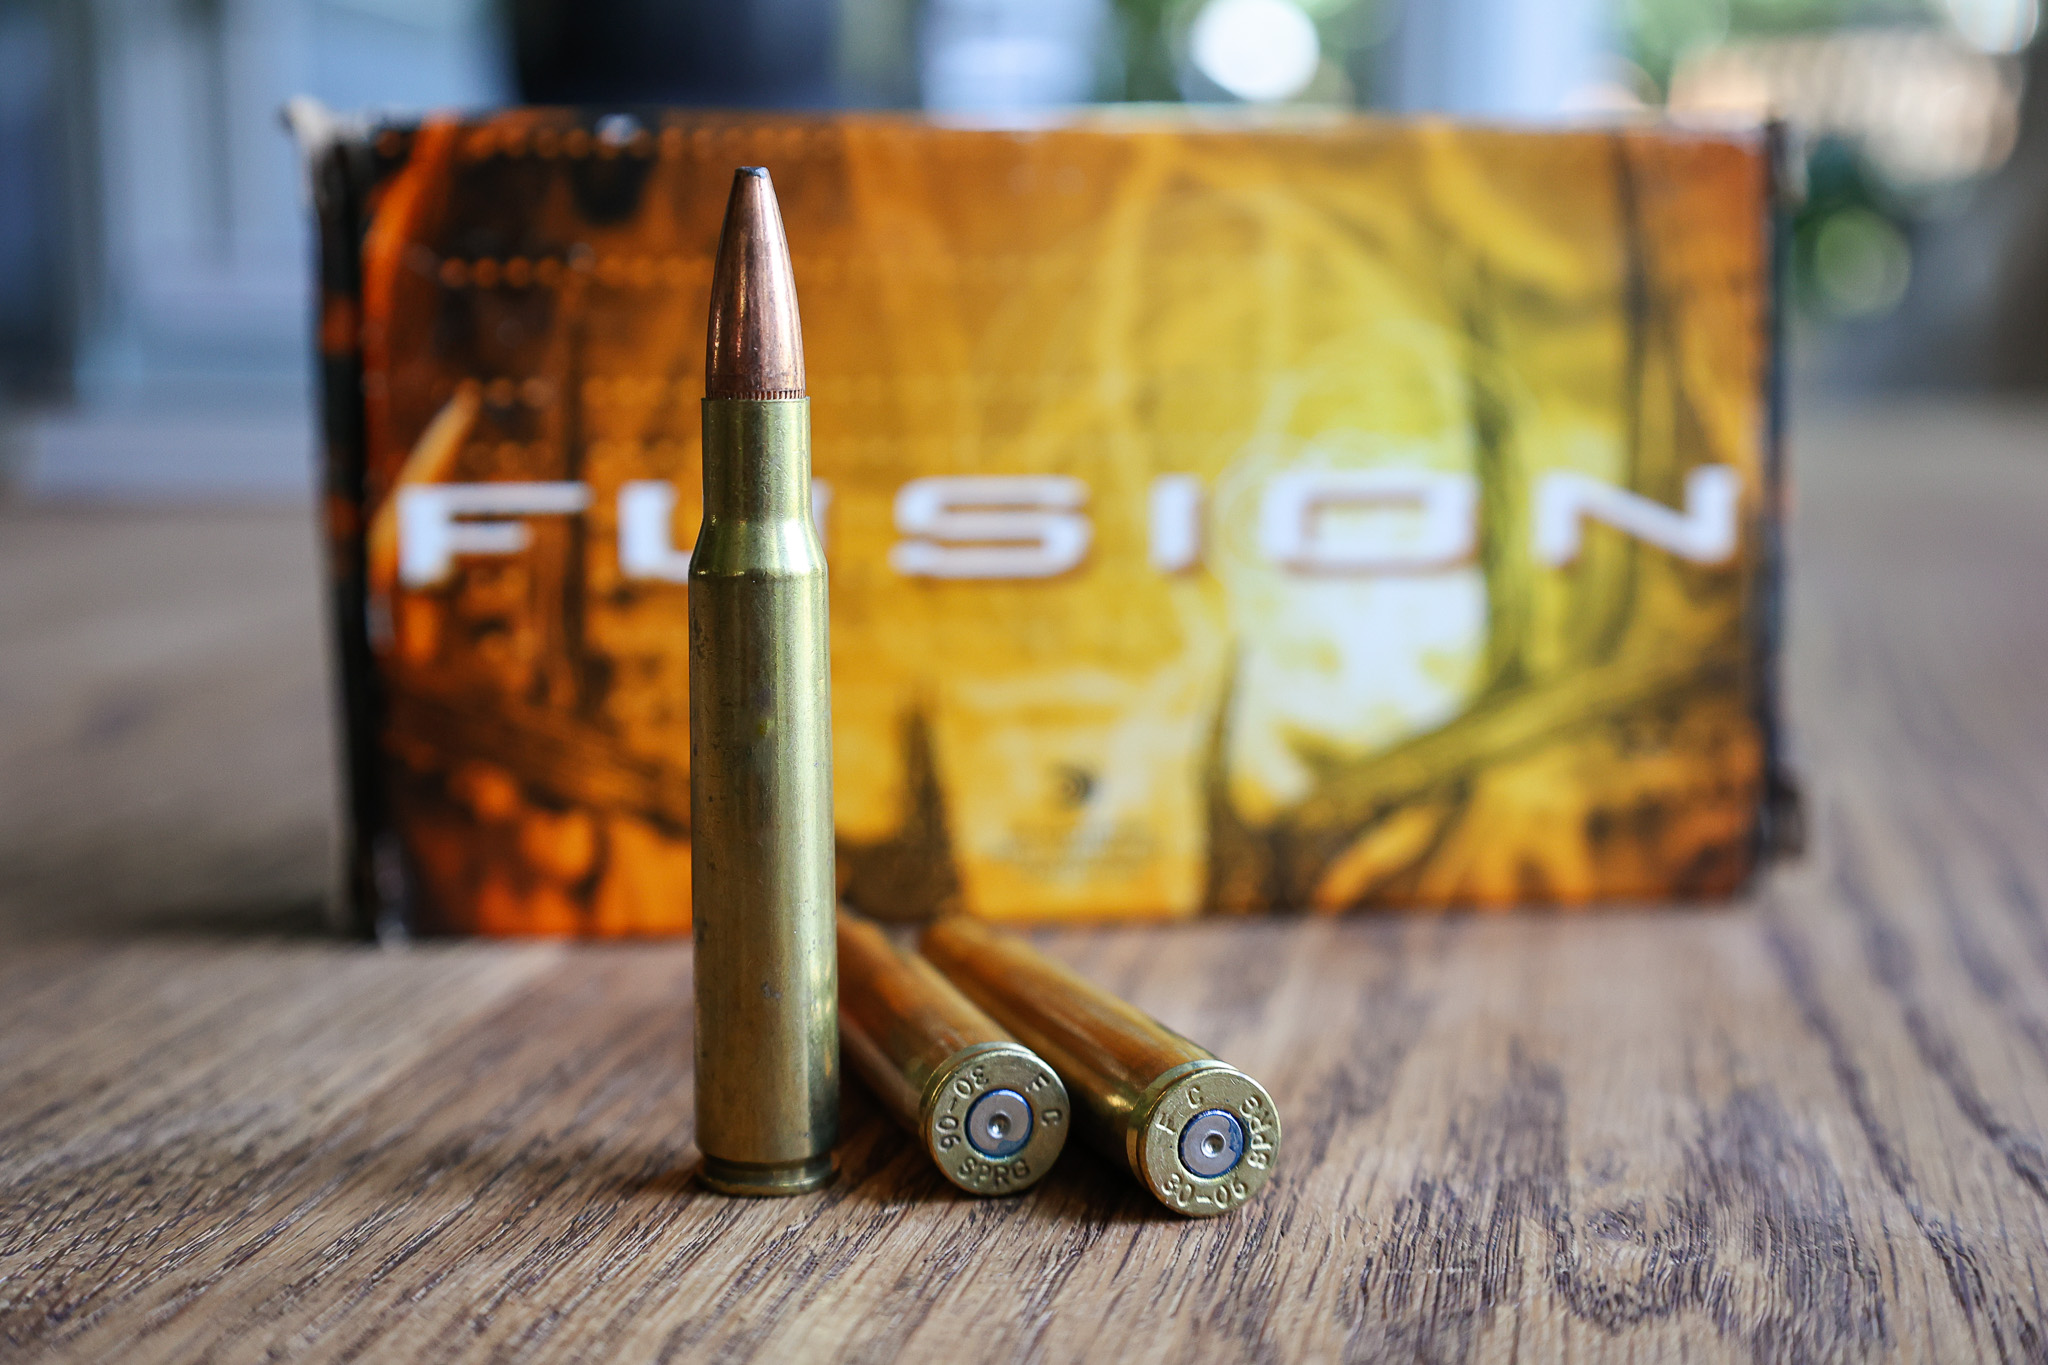 A box of Federal Fusion in .30-06 used to compare ballistics with the .308 Win.